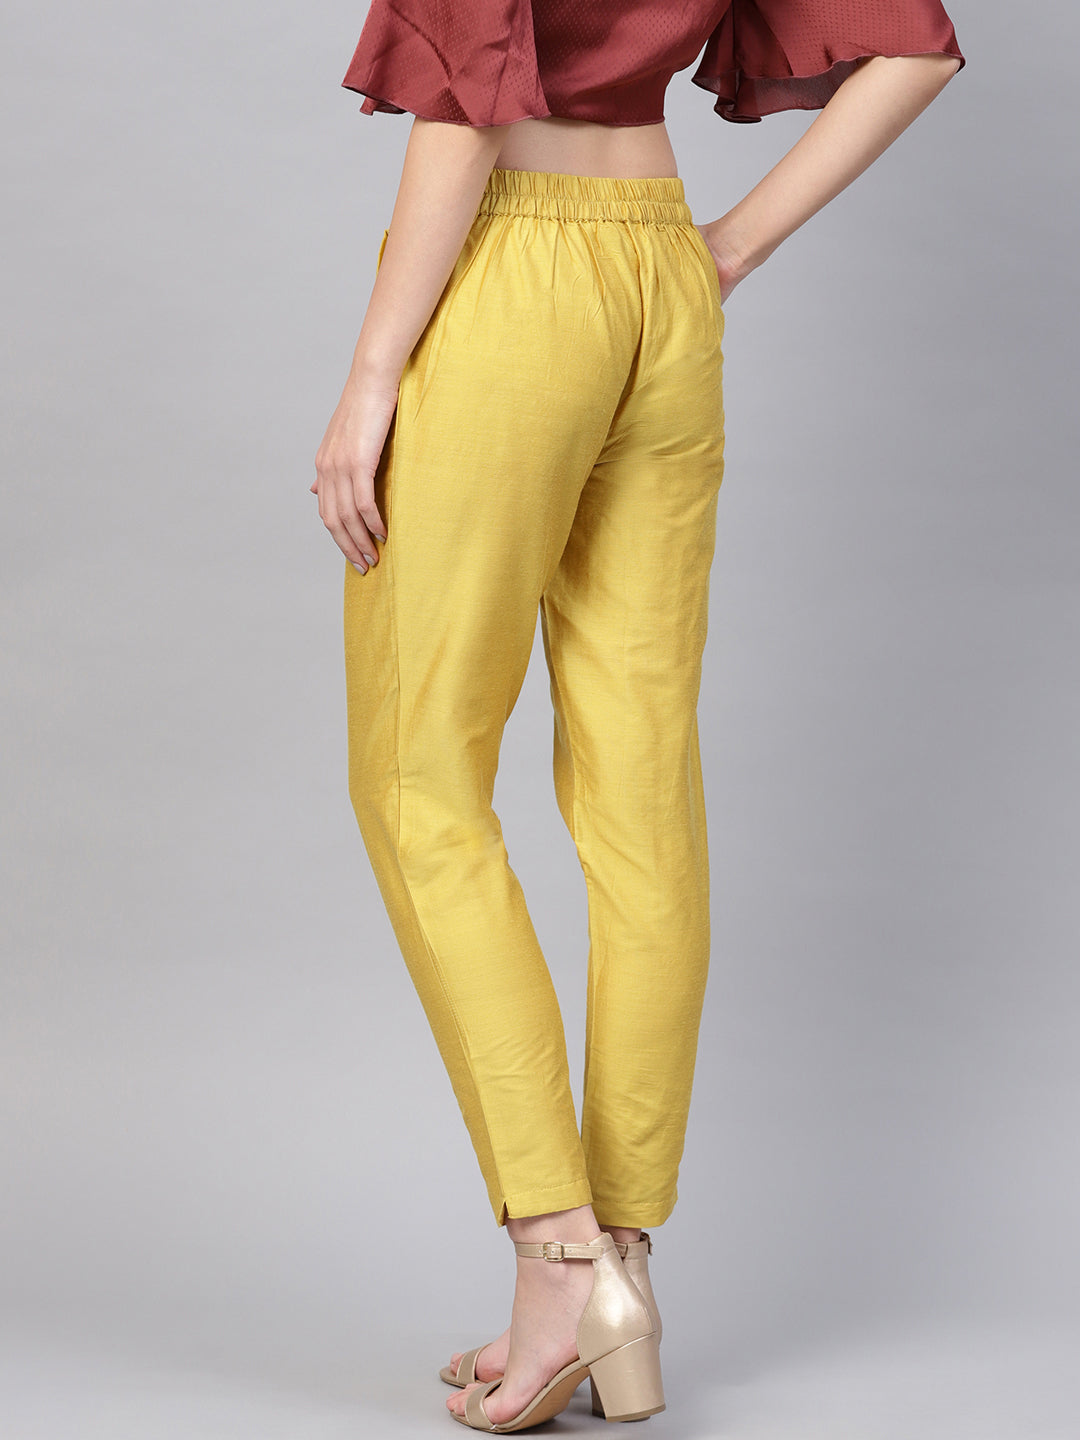 Yellow Chanderi Solid Pant in Shiny Texture